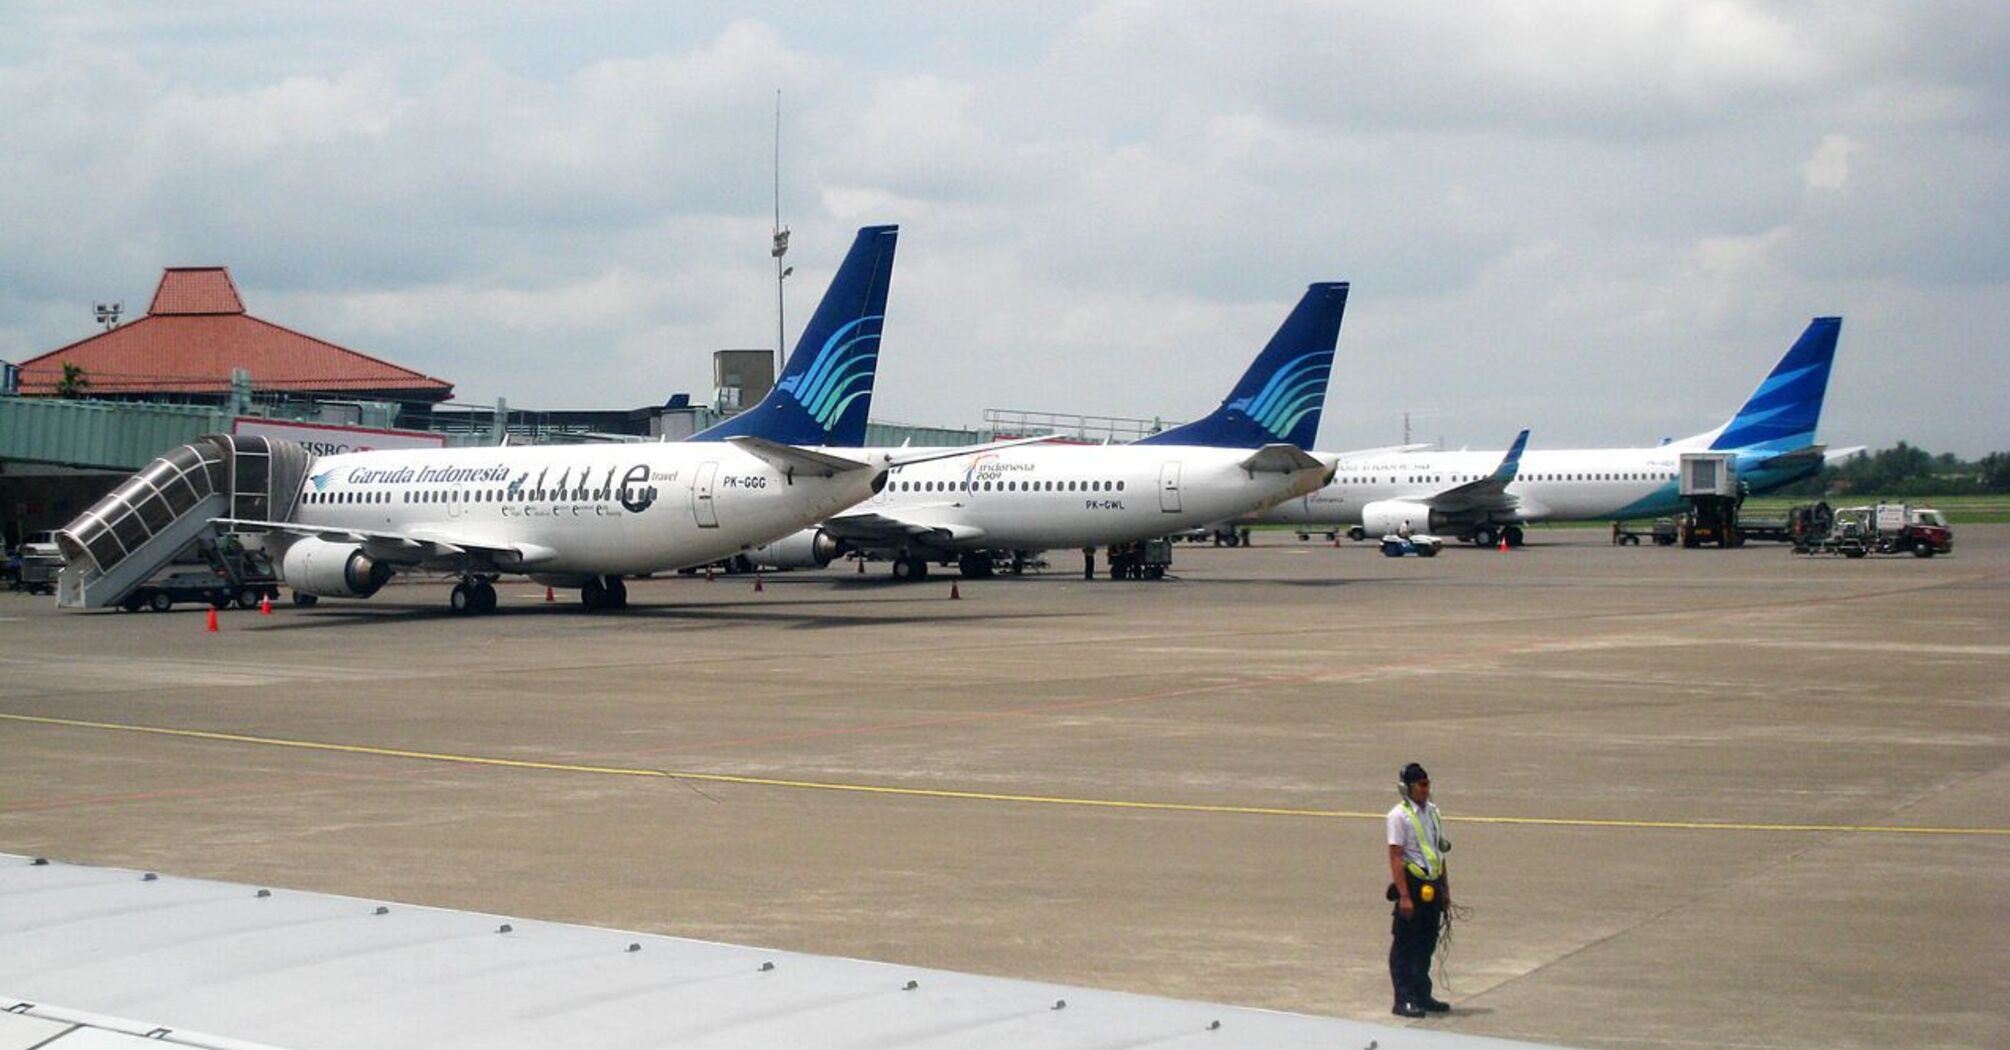 Garuda Indonesia Compensation for Delayed or Cancelled Flights